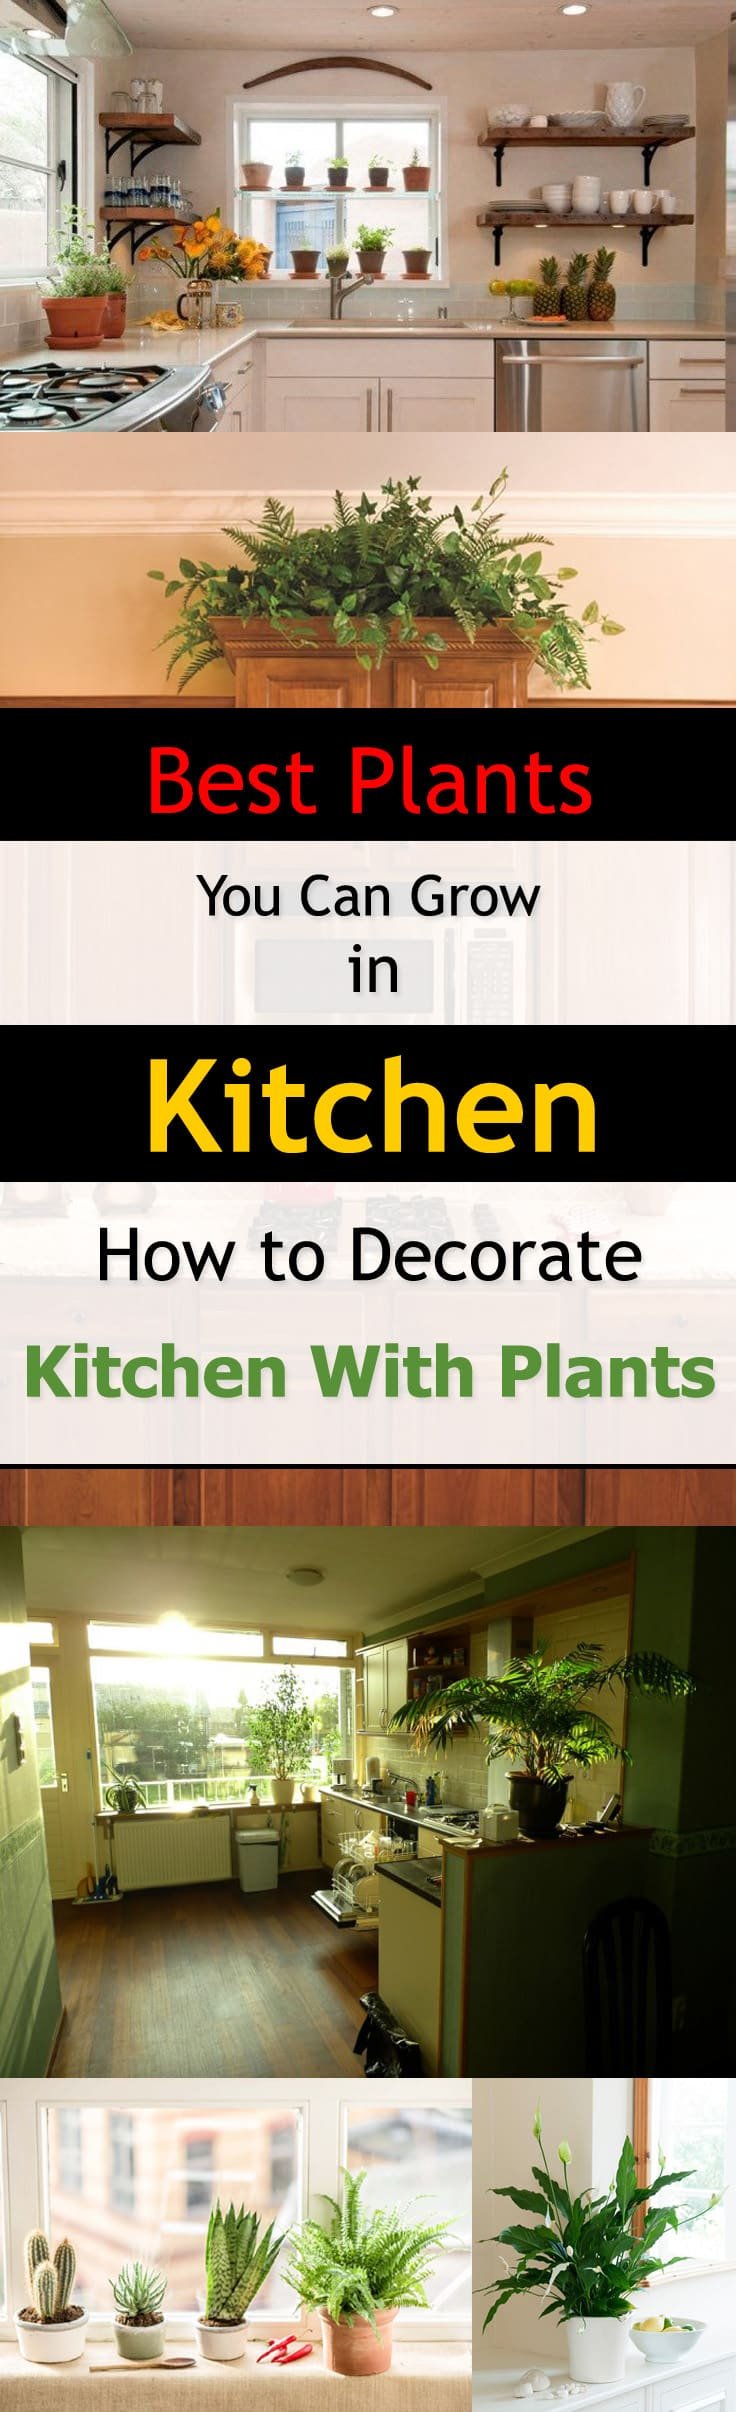 Make your kitchen look more fresh and inviting than ever before. See the best kitchen plants you can grow in your kitchen to decorate it.